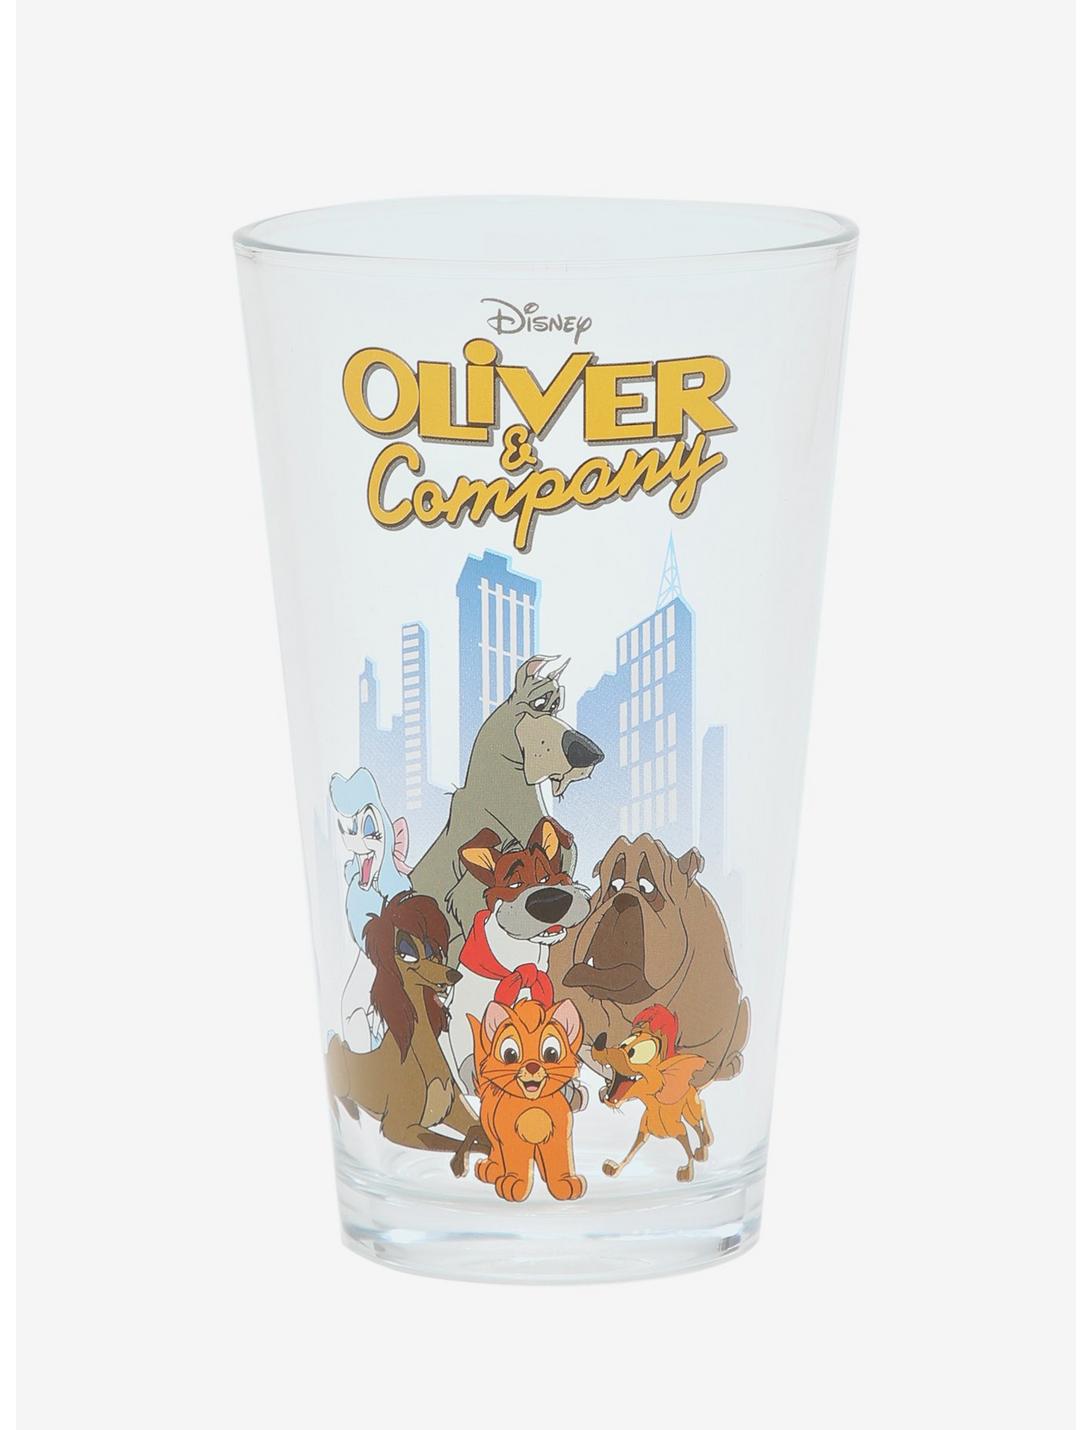 Disney Oliver & Company Character Portrait Pint Glass - BoxLunch Exclusive, , hi-res